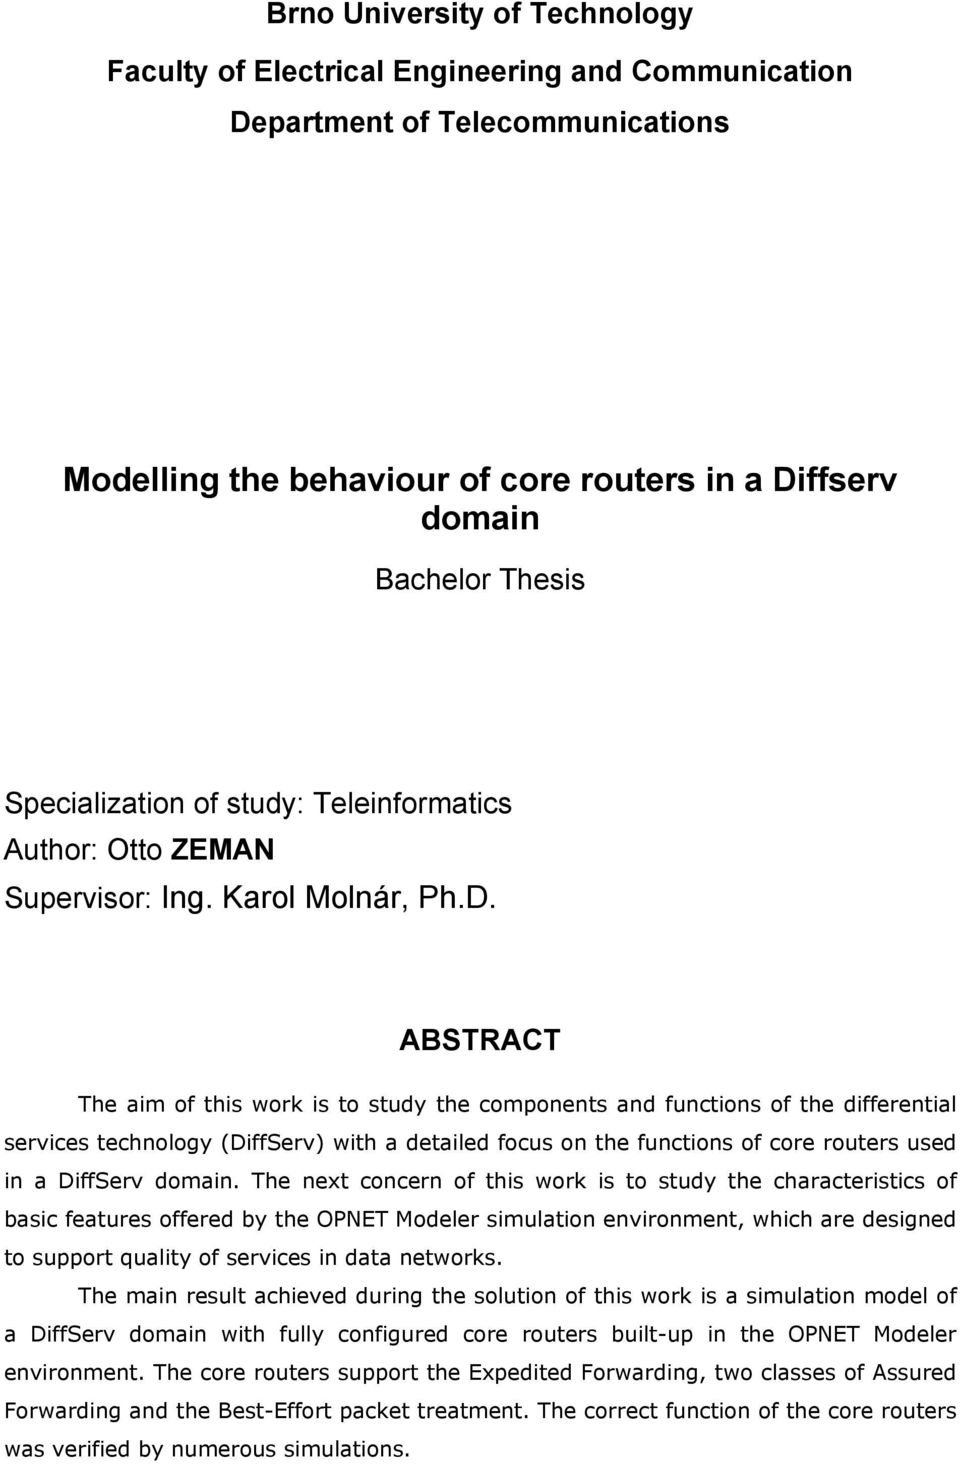 ABSTRACT The aim of this work is to study the components and functions of the differential services technology (DiffServ) with a detailed focus on the functions of core routers used in a DiffServ